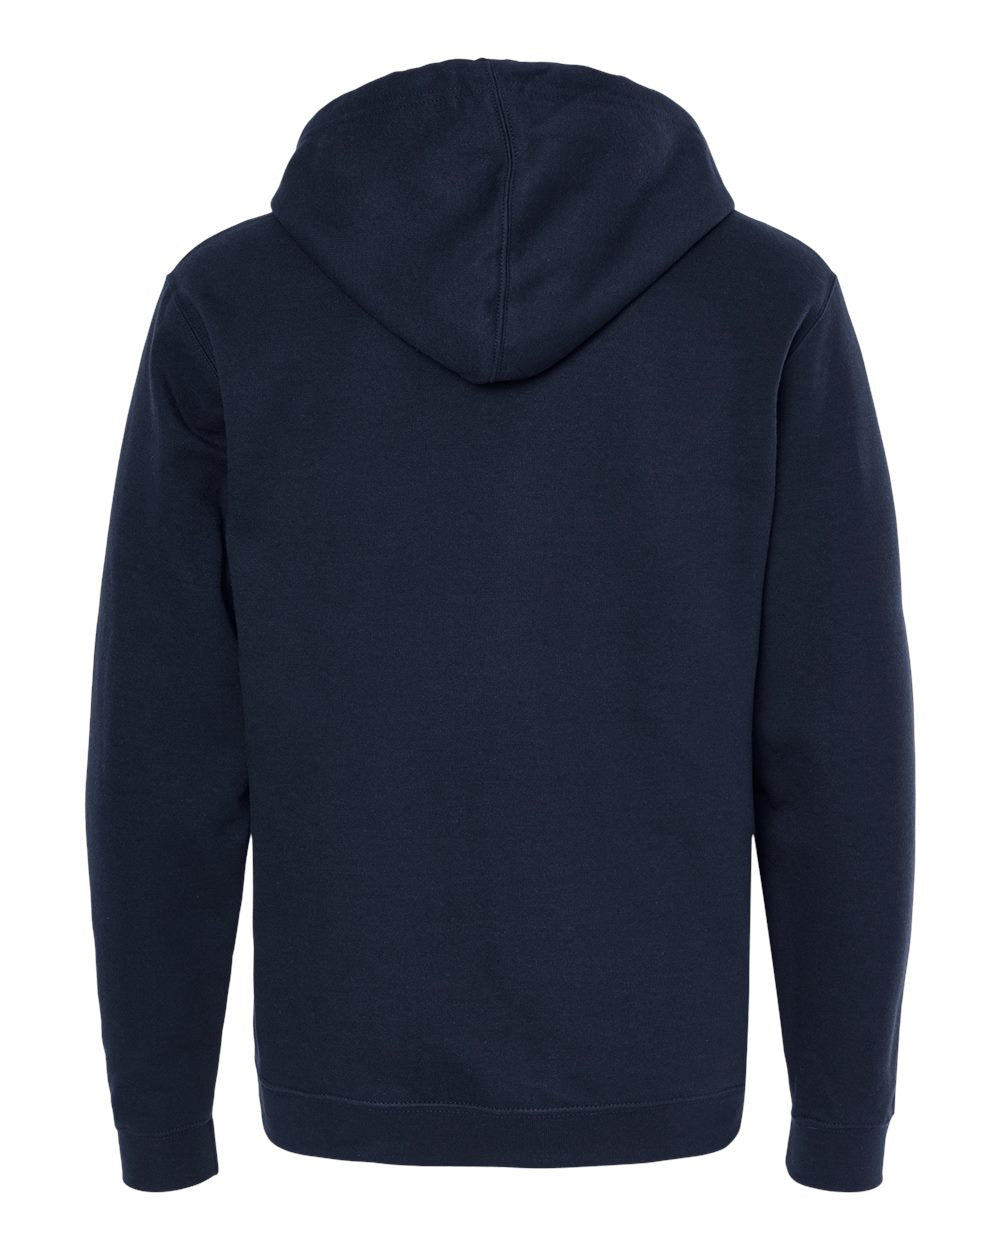 M&O Unisex Pullover Hoodie 3320 #color_Navy